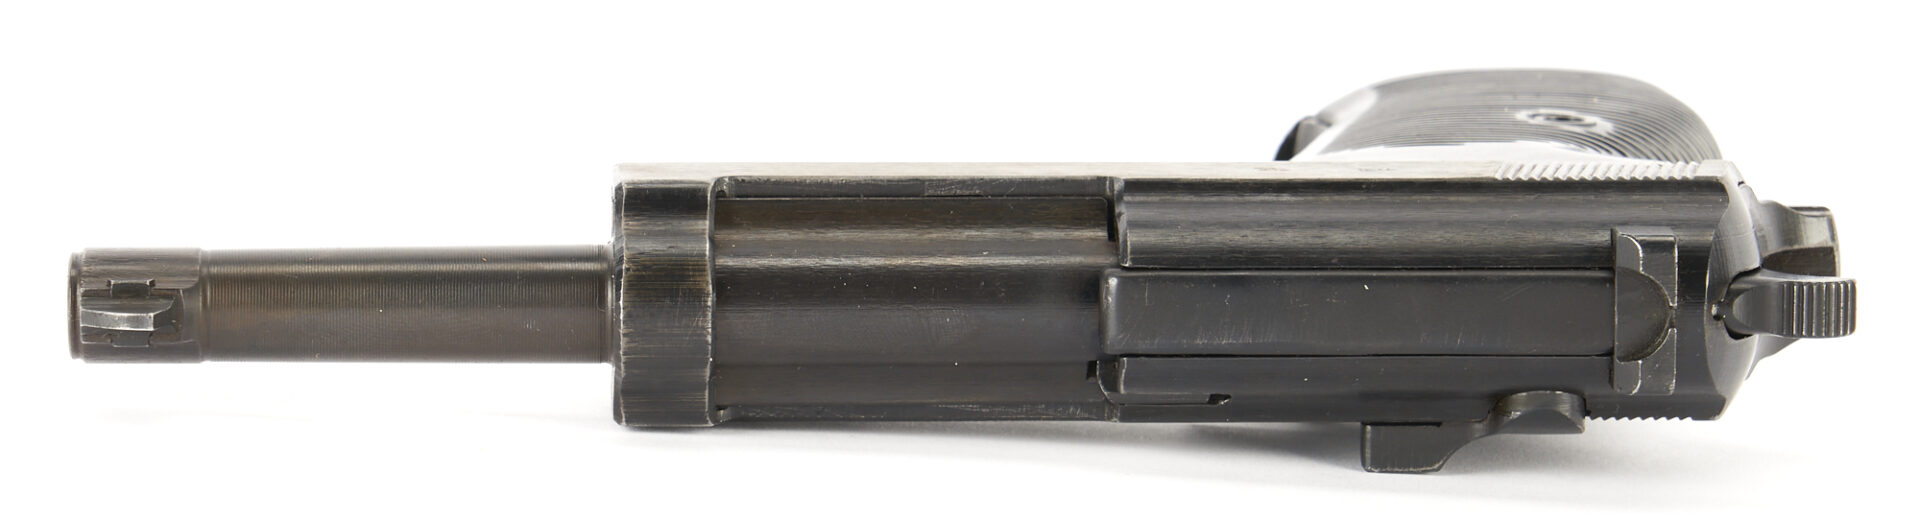 Lot 519: Mauser P38 Byf/44, 9mm Luger, 1944 WW2 Police Use